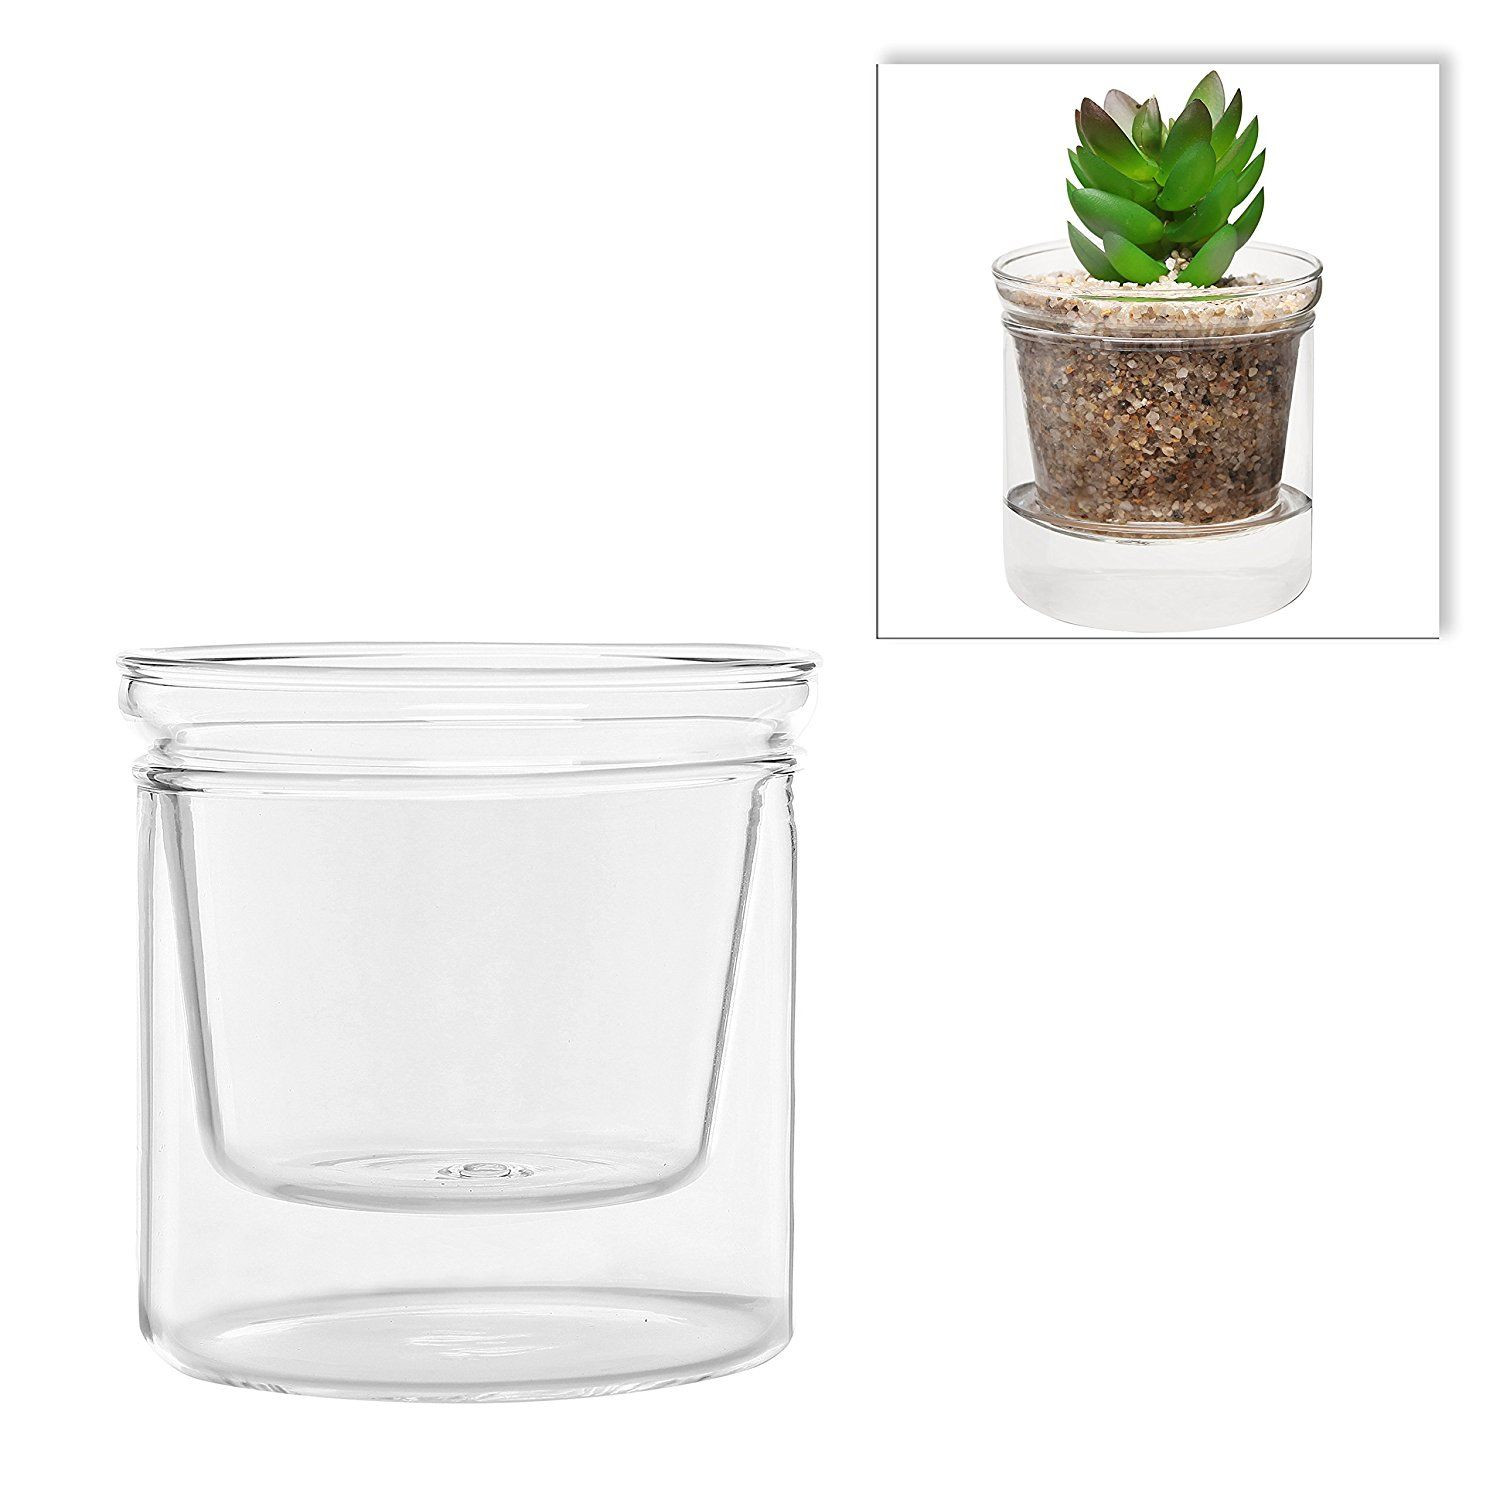 10 Lovable Amazon Clear Glass Vases 2024 free download amazon clear glass vases of amazon com mygifta home decorative small clear glass succulent pertaining to amazon com mygifta home decorative small clear glass succulent plant holder freestand